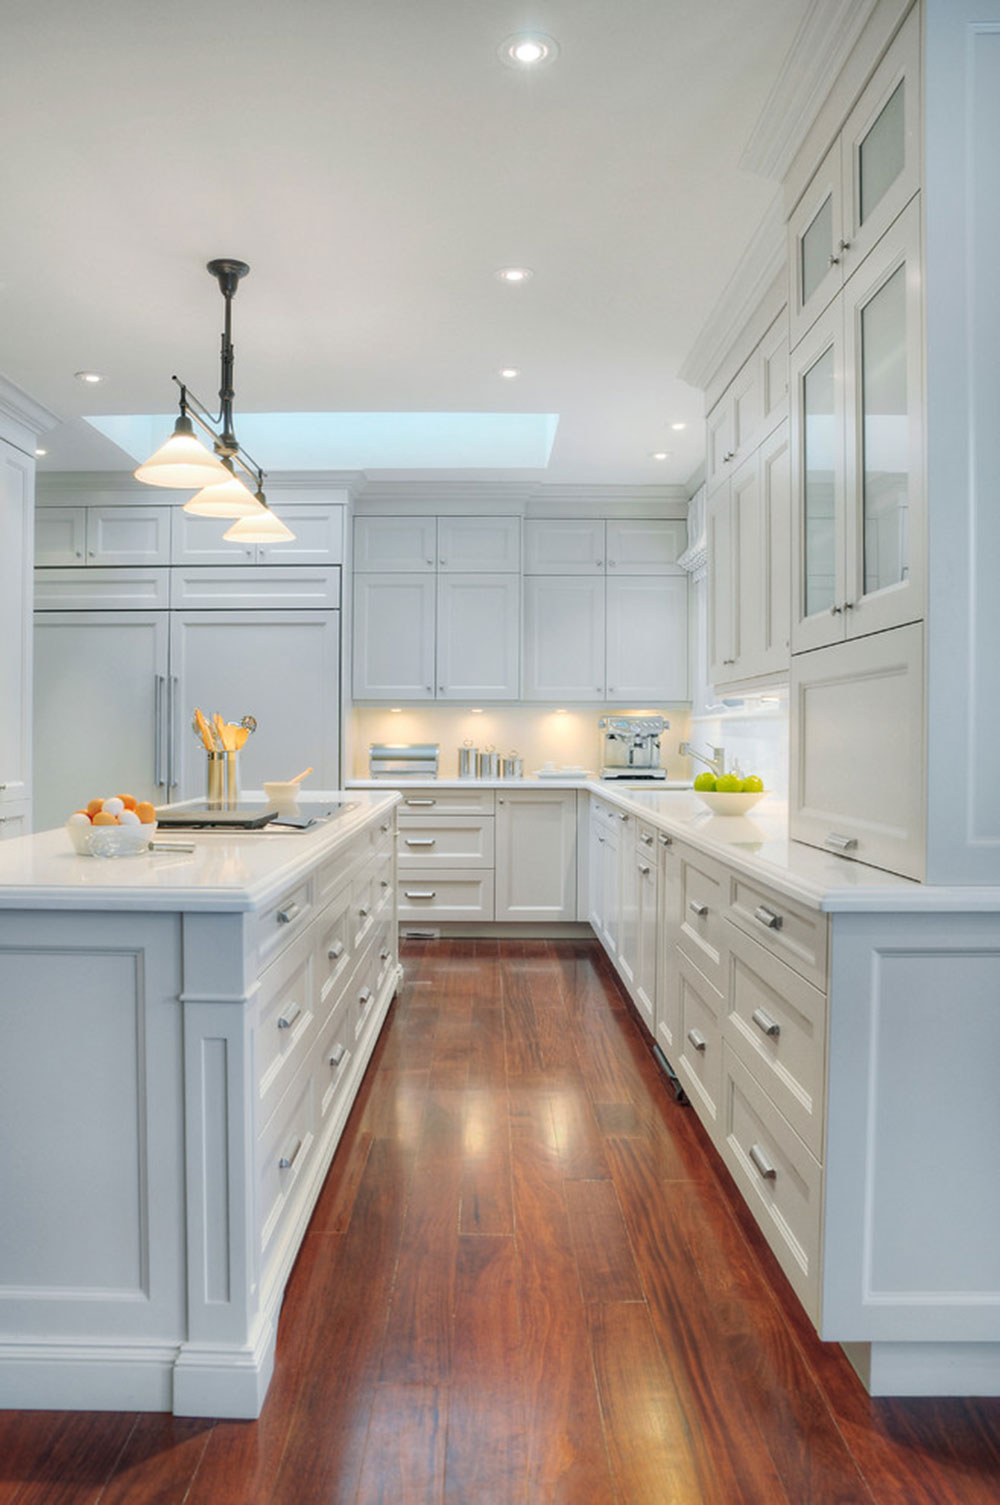 Creatice White Kitchen Cabinets With Quartz Counter Top for Small Space